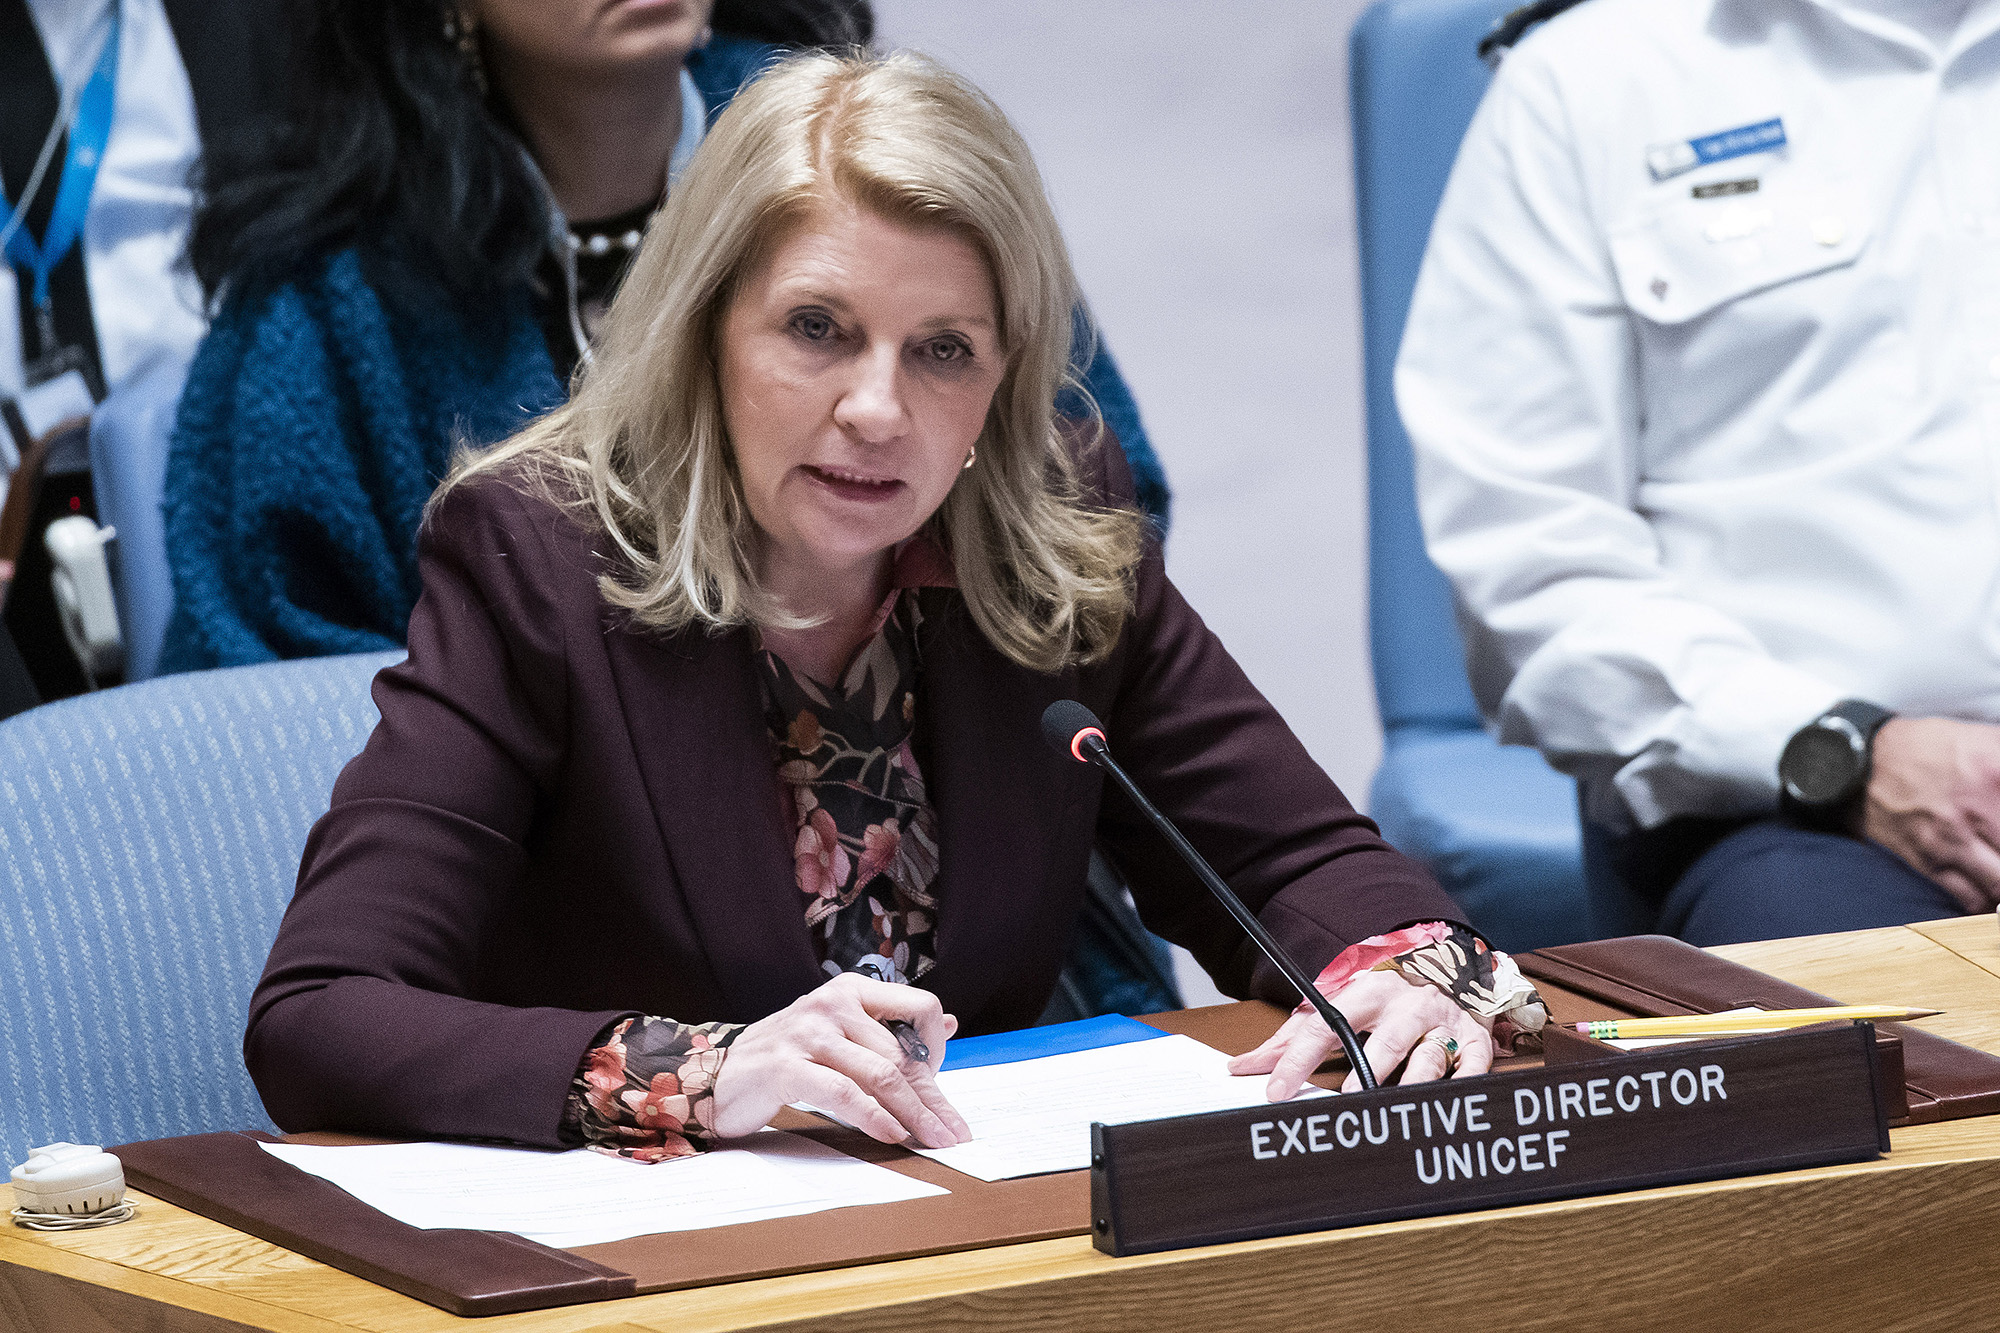 Executive Director of UNICEF Catherine Russell addresses members of the U.N. Security Council at United Nations headquarters in New York on October 30.